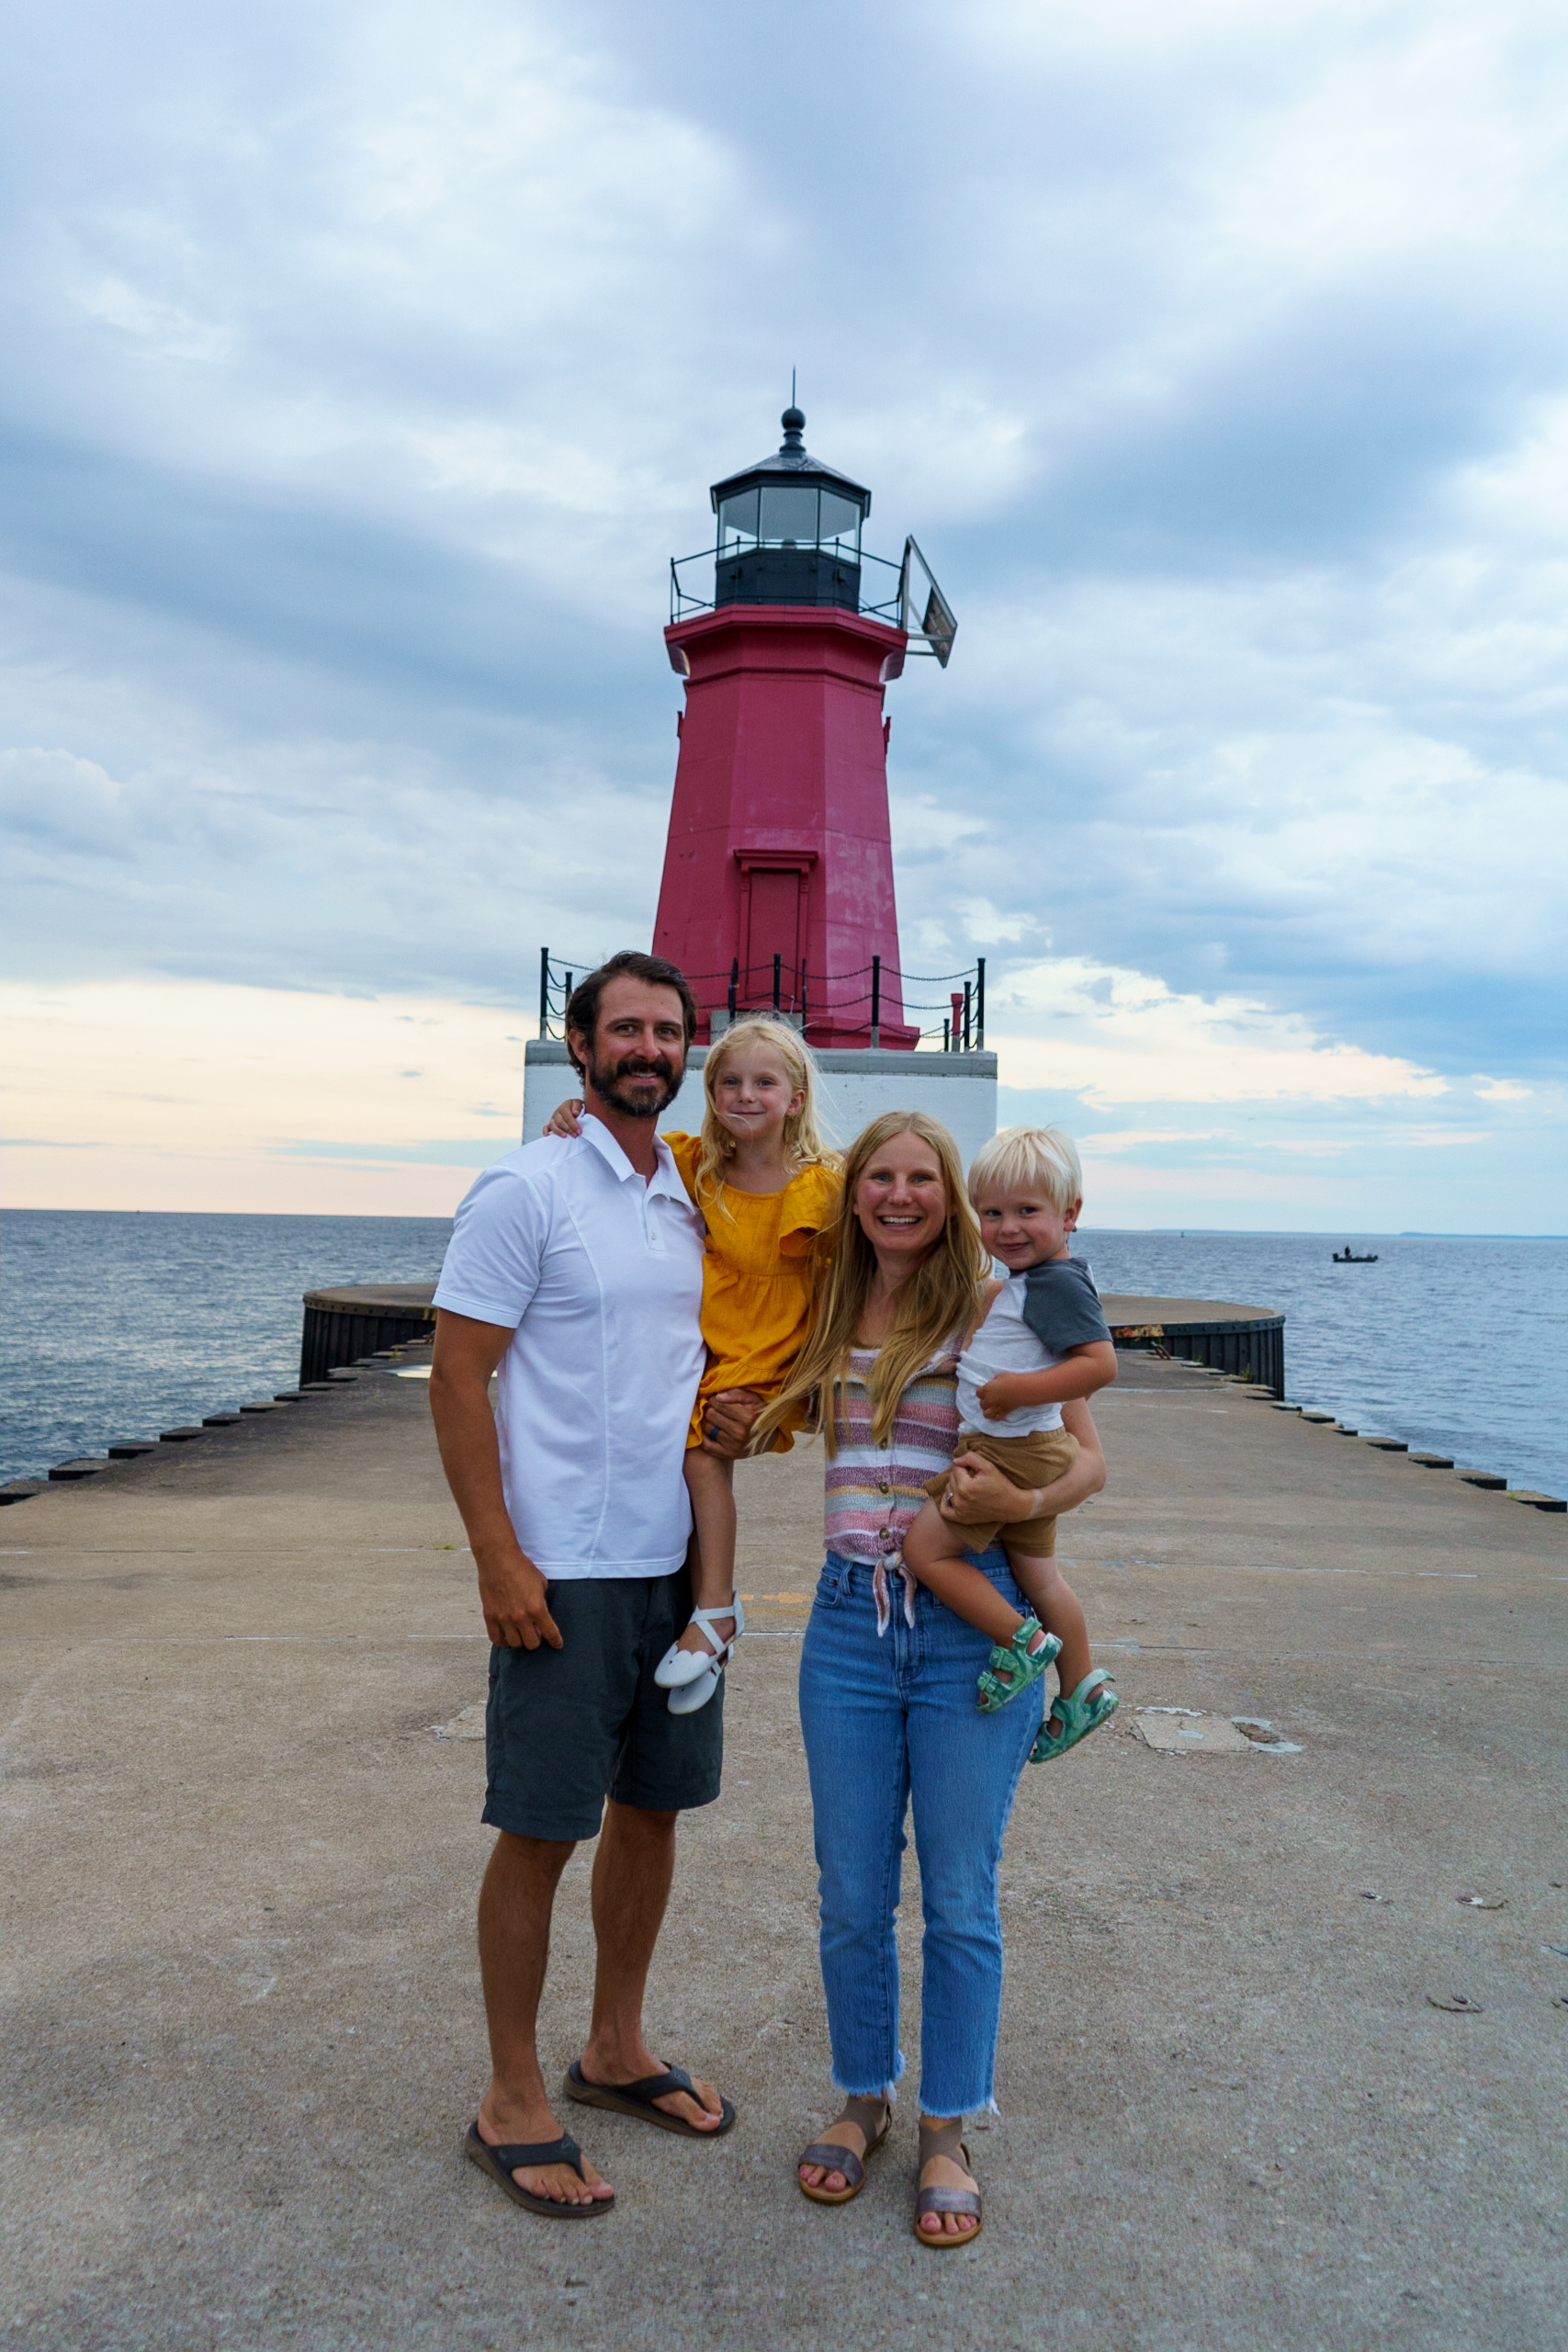 Functional Medicine Provider Alison Percowycz, MSN, FNP-C with her husband and two children in front of a lighthouse.